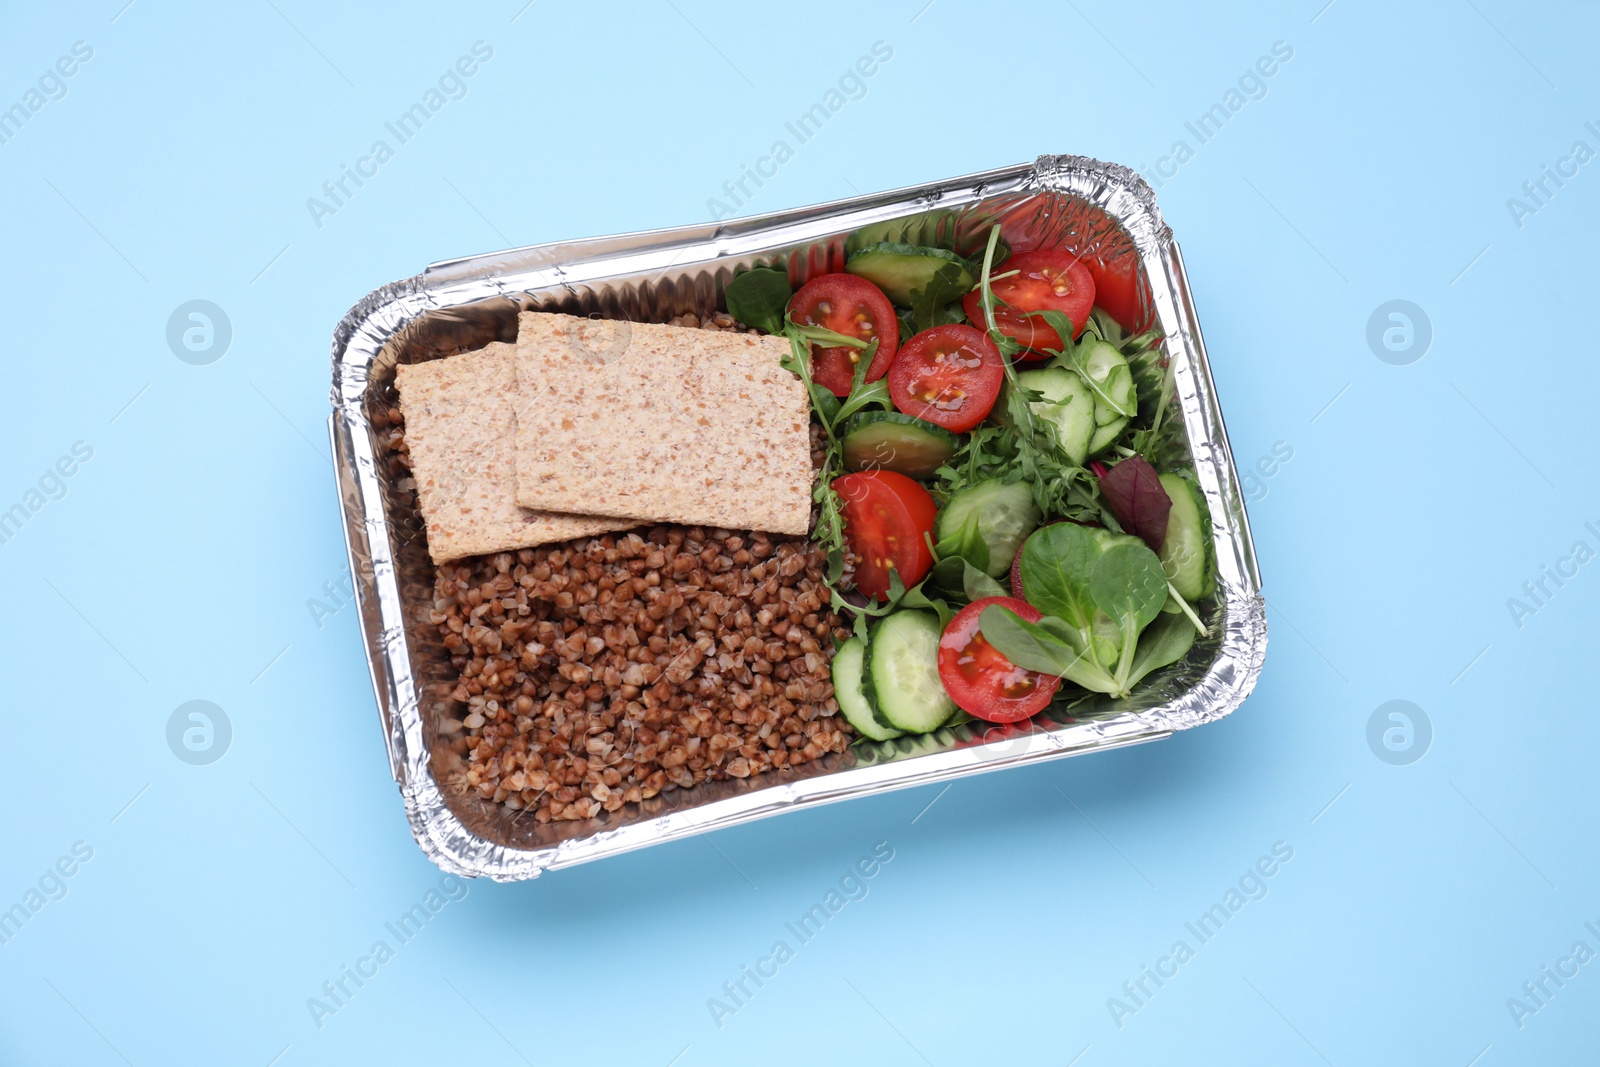 Photo of Container with buckwheat, fresh salad and crispbreads on light blue background, top view